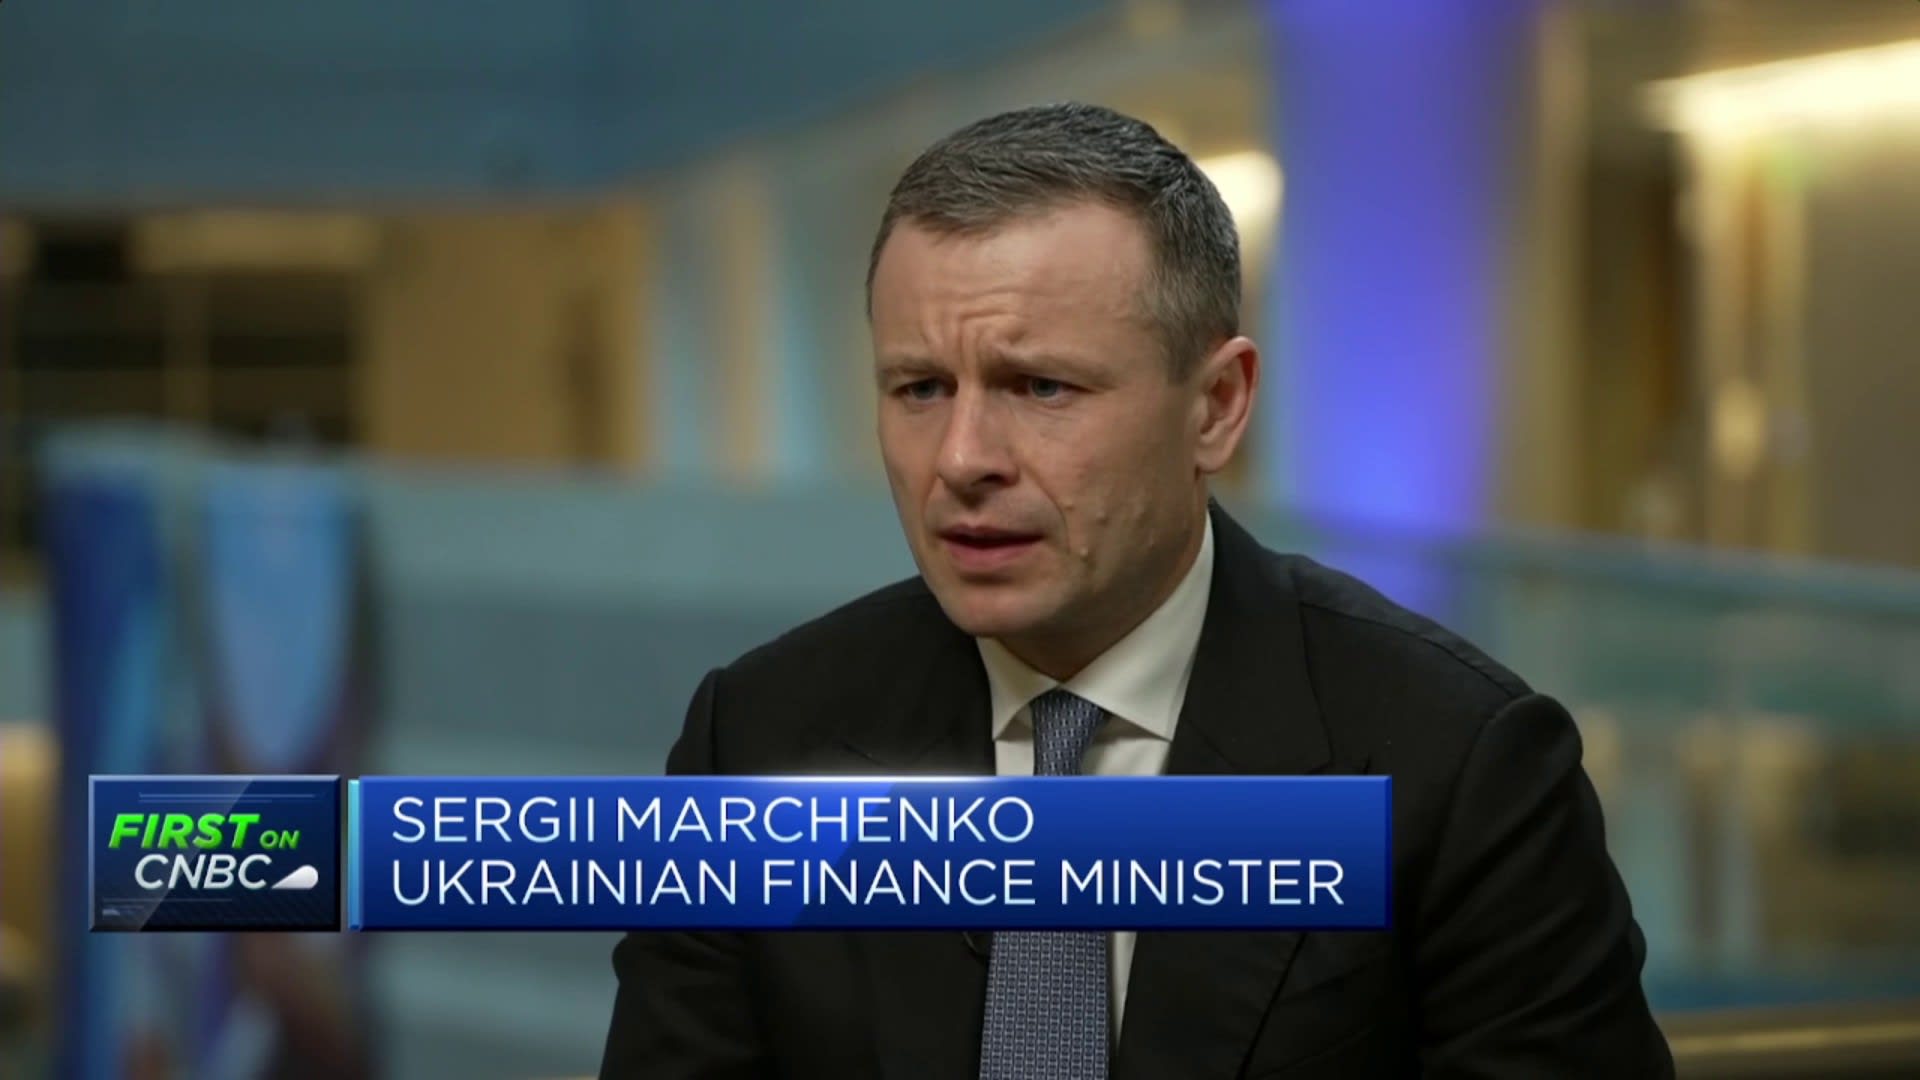 Expect economic growth for Ukraine this year, finance minister says [Video]